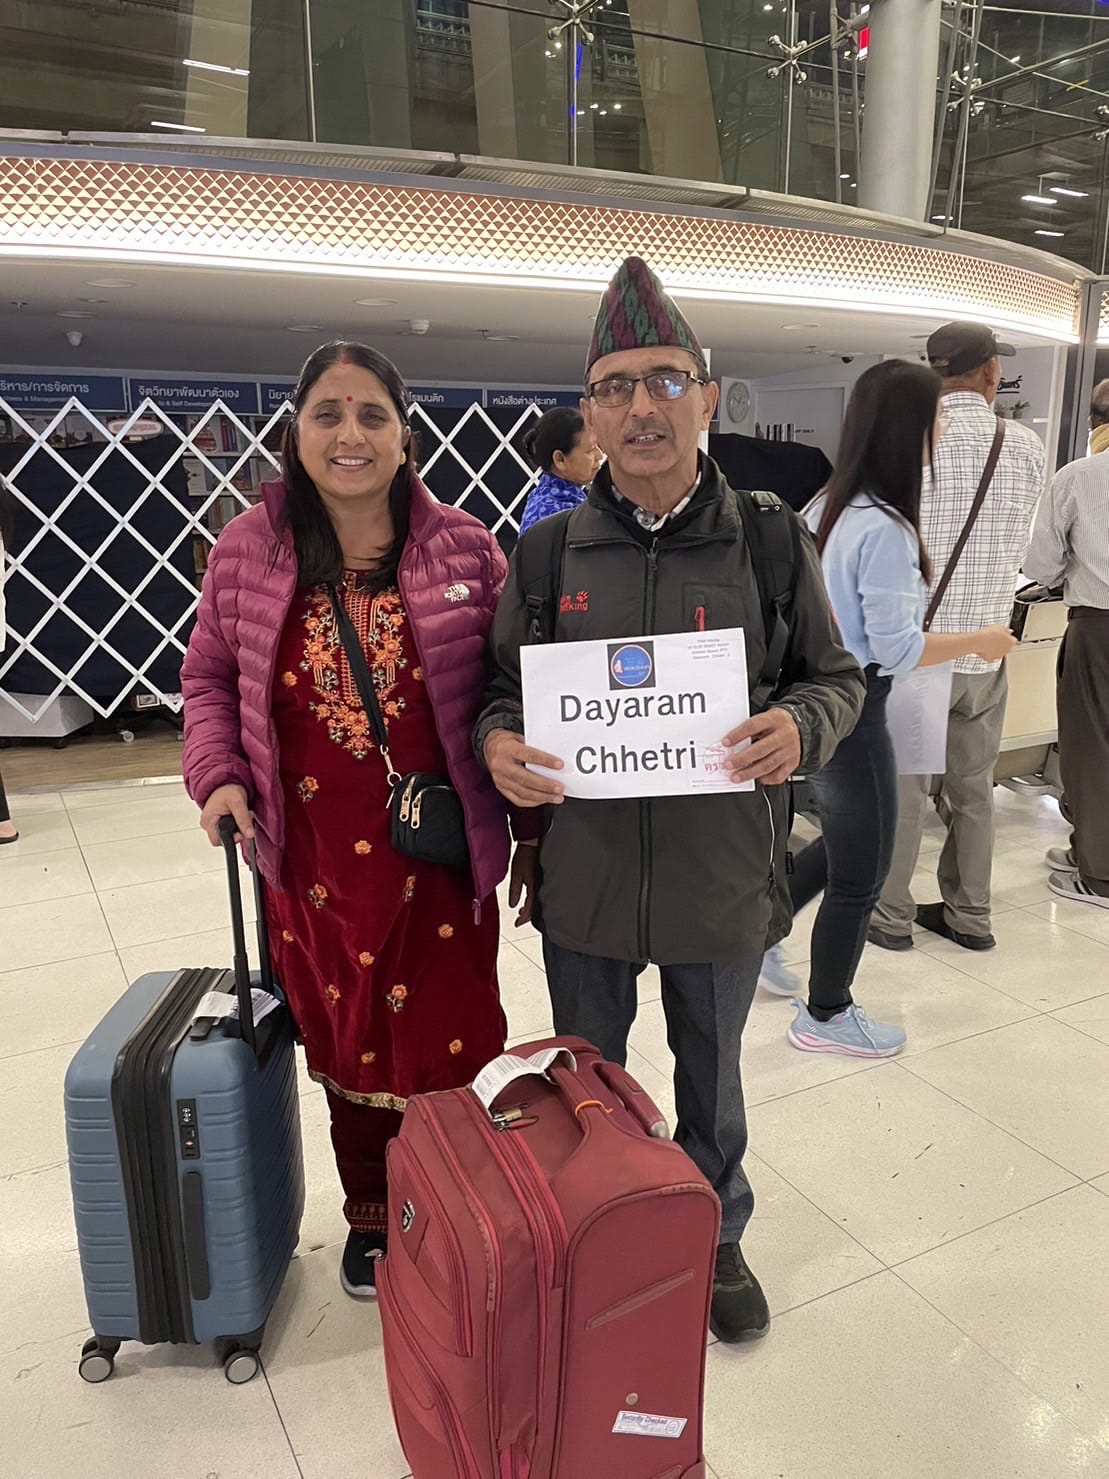 a man and woman holding a sign and luggage